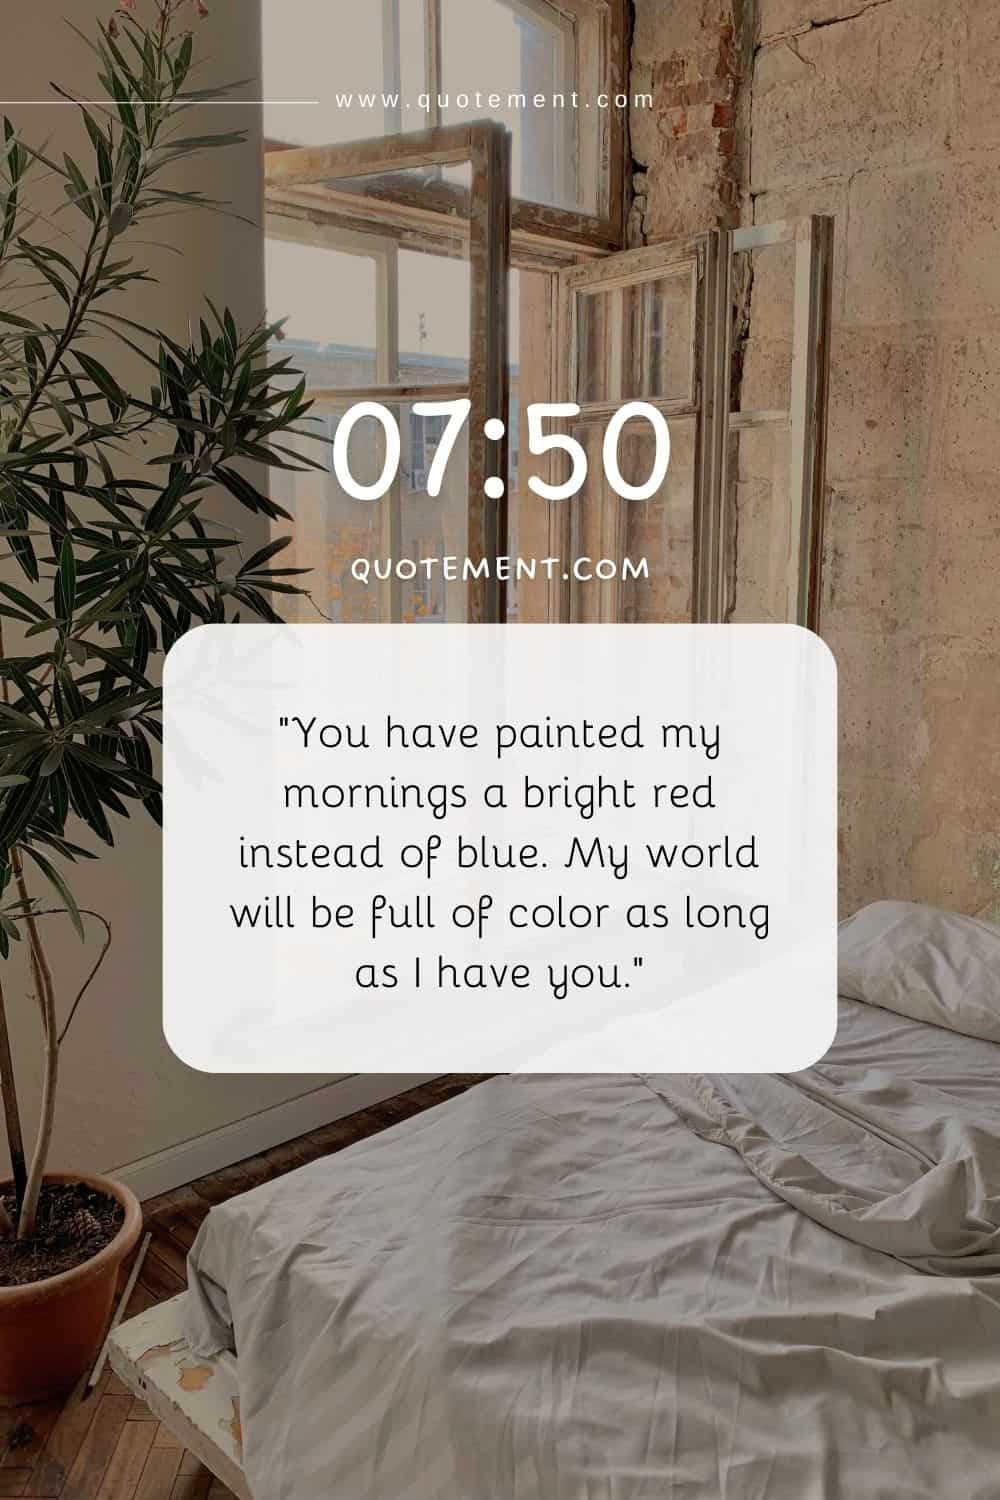 pop-up message on a phone screen with bedroom ambiance